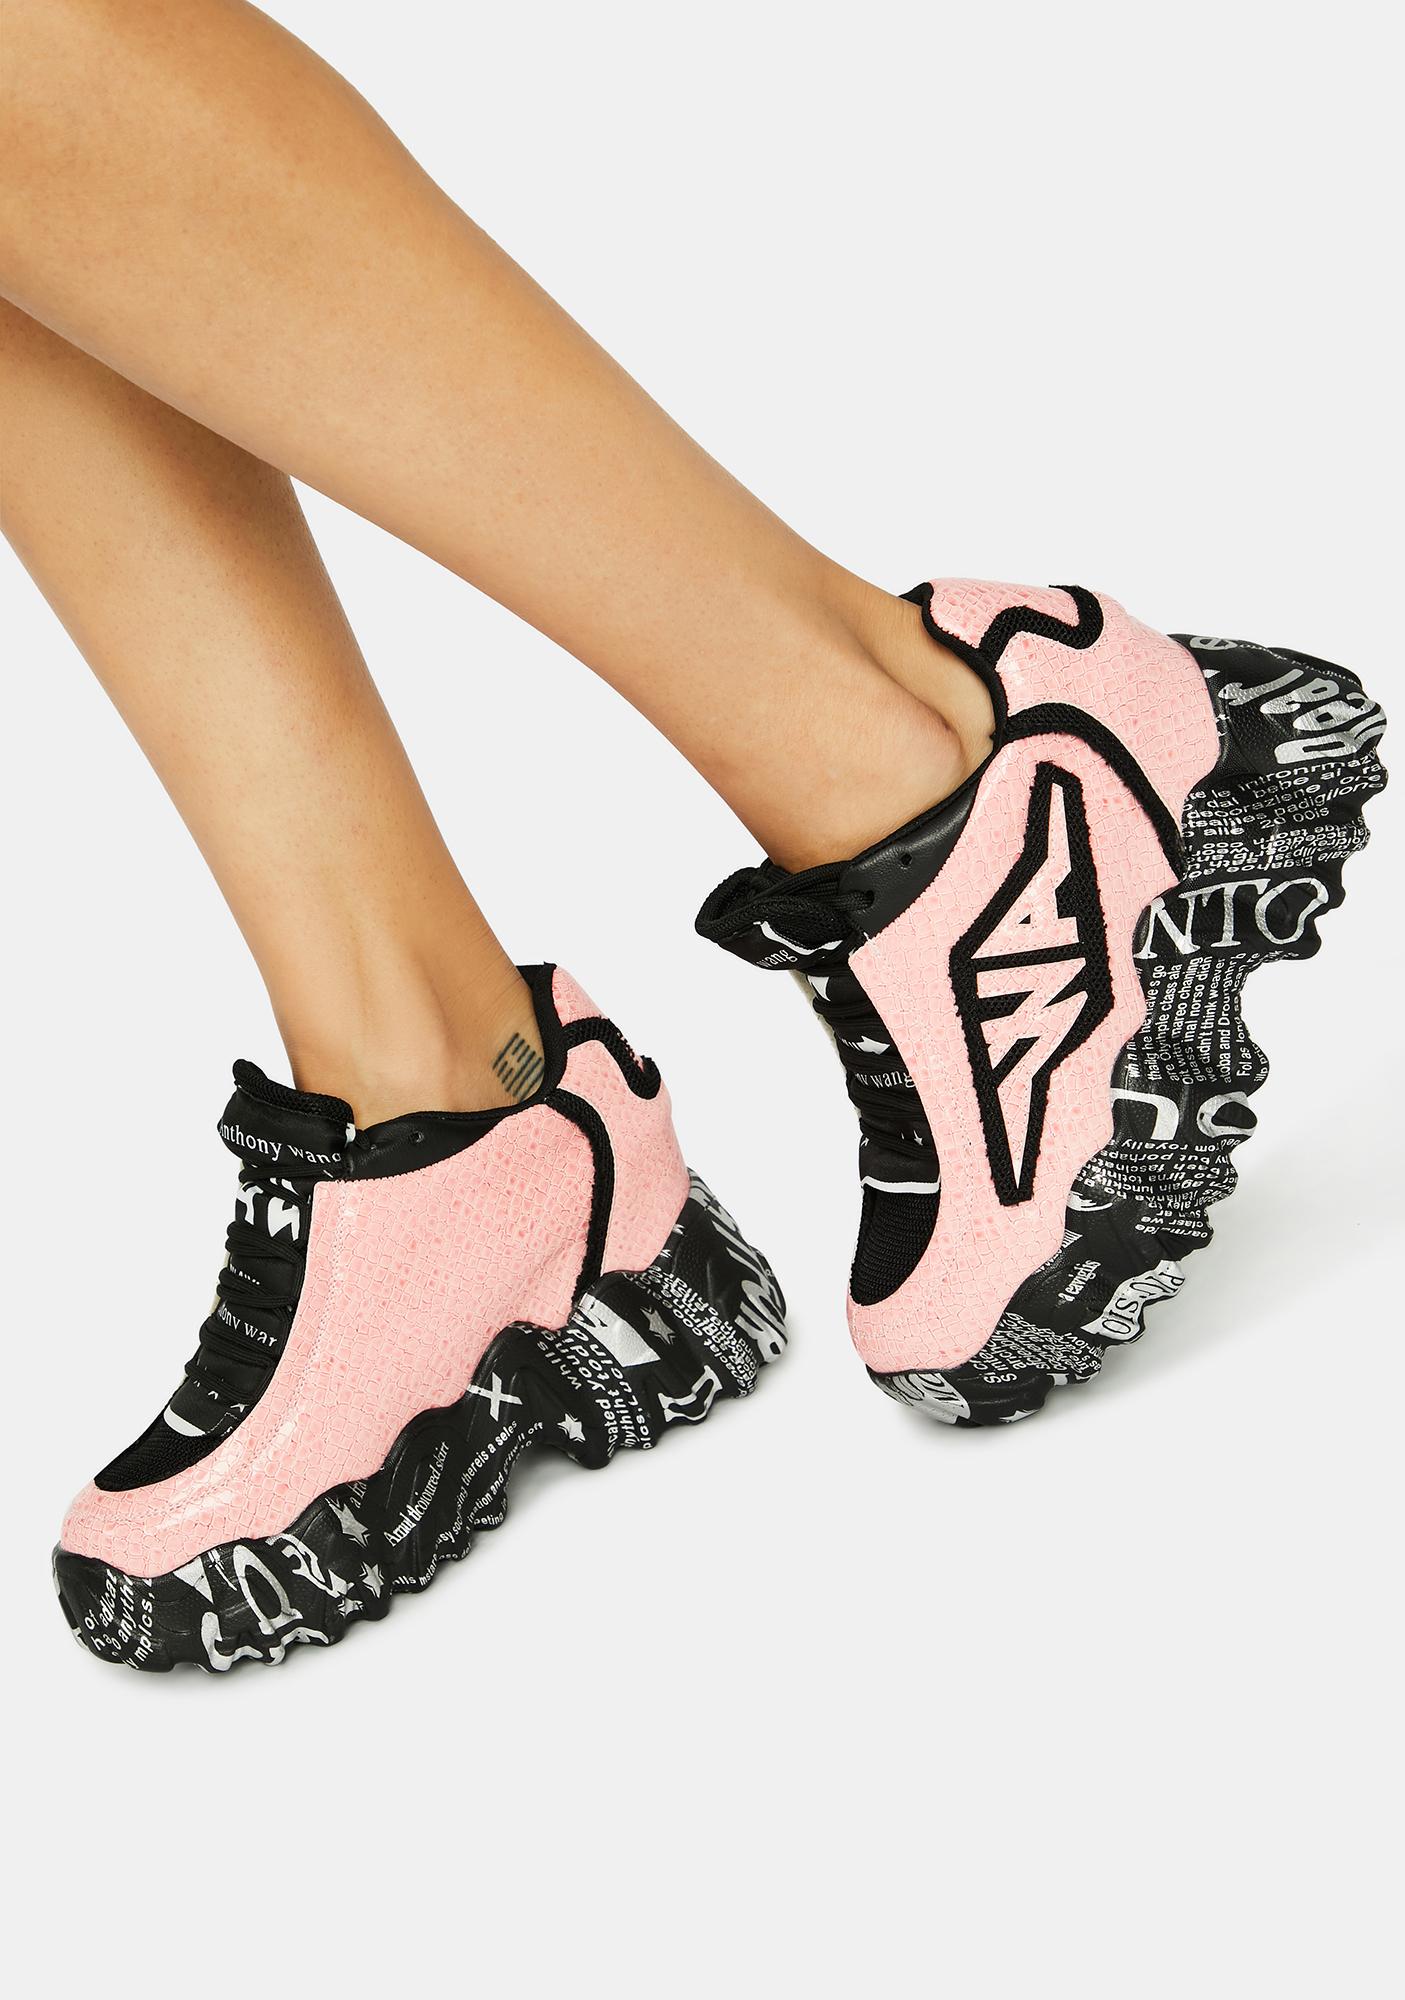 Anthony Wang Pink Blackberry Sneakers | Dolls Kill